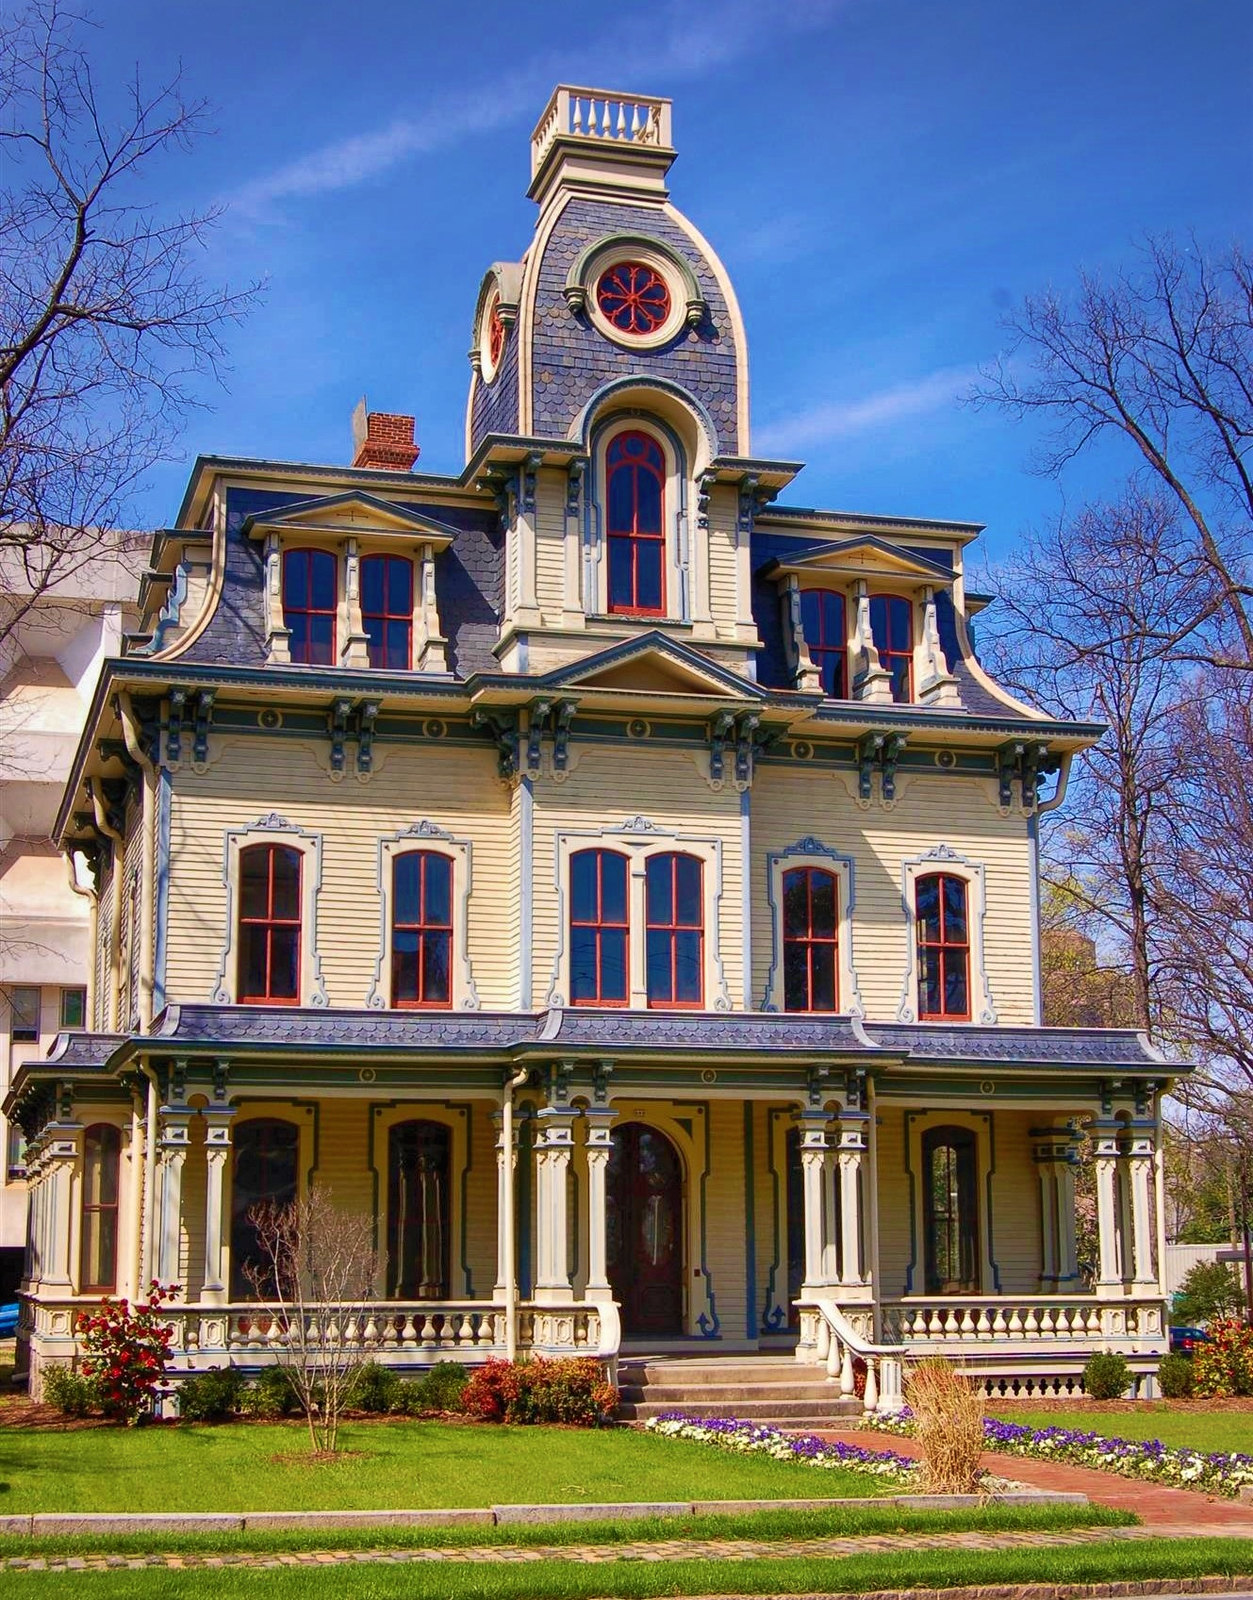 Heck-Andrews House in Raleigh, North Carolina, completed in 1870.